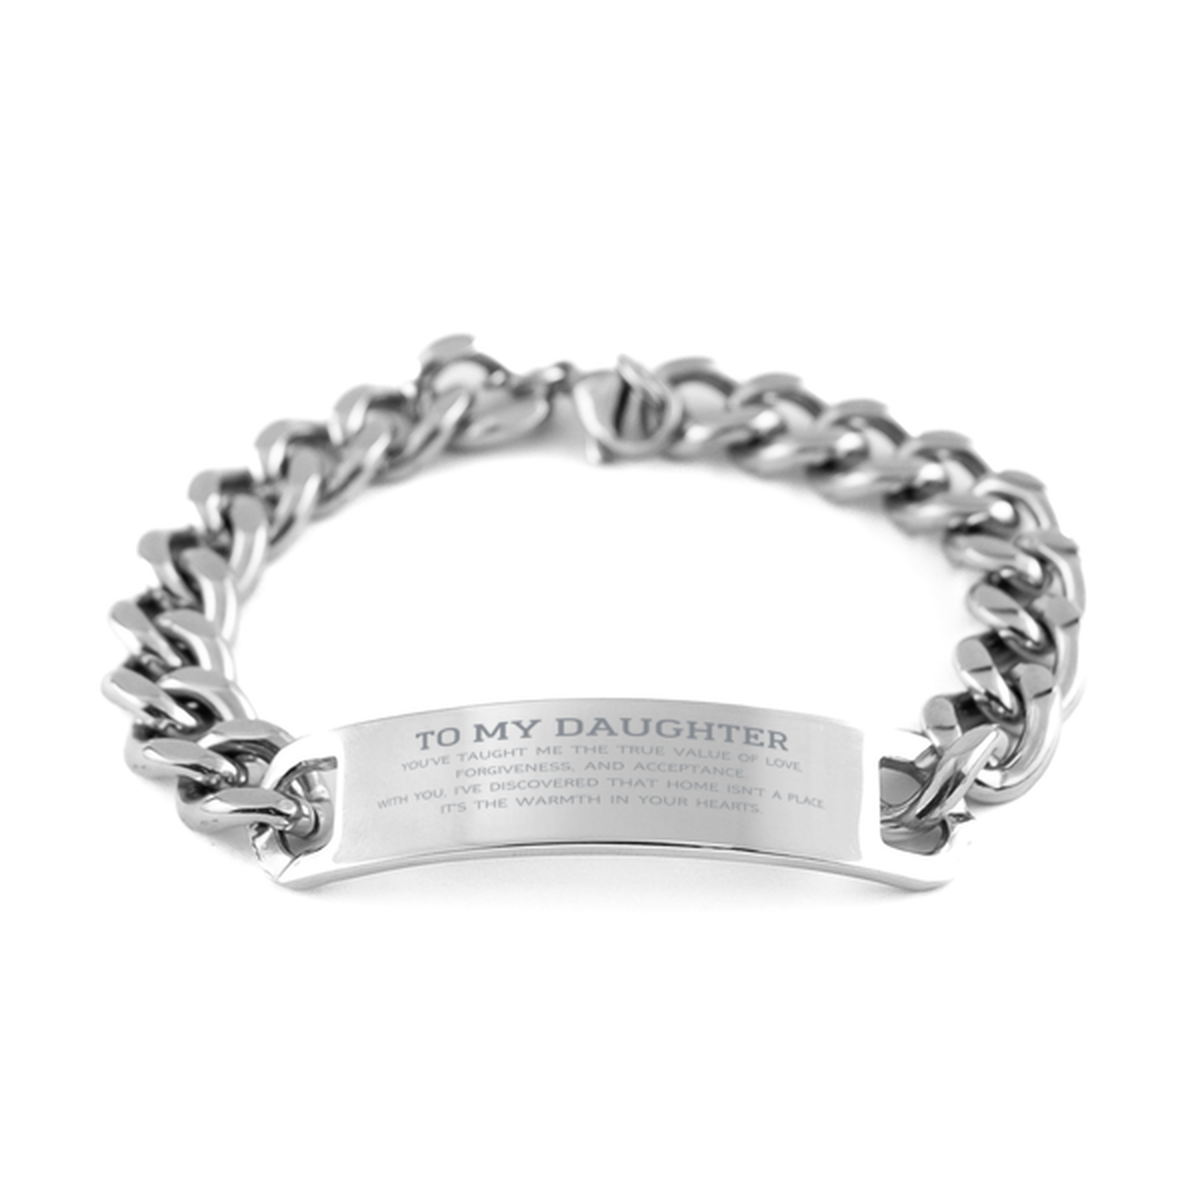 To My Daughter Gifts, You've taught me the true value of love, Thank You Gifts For Daughter, Birthday Cuban Chain Stainless Steel Bracelet For Daughter